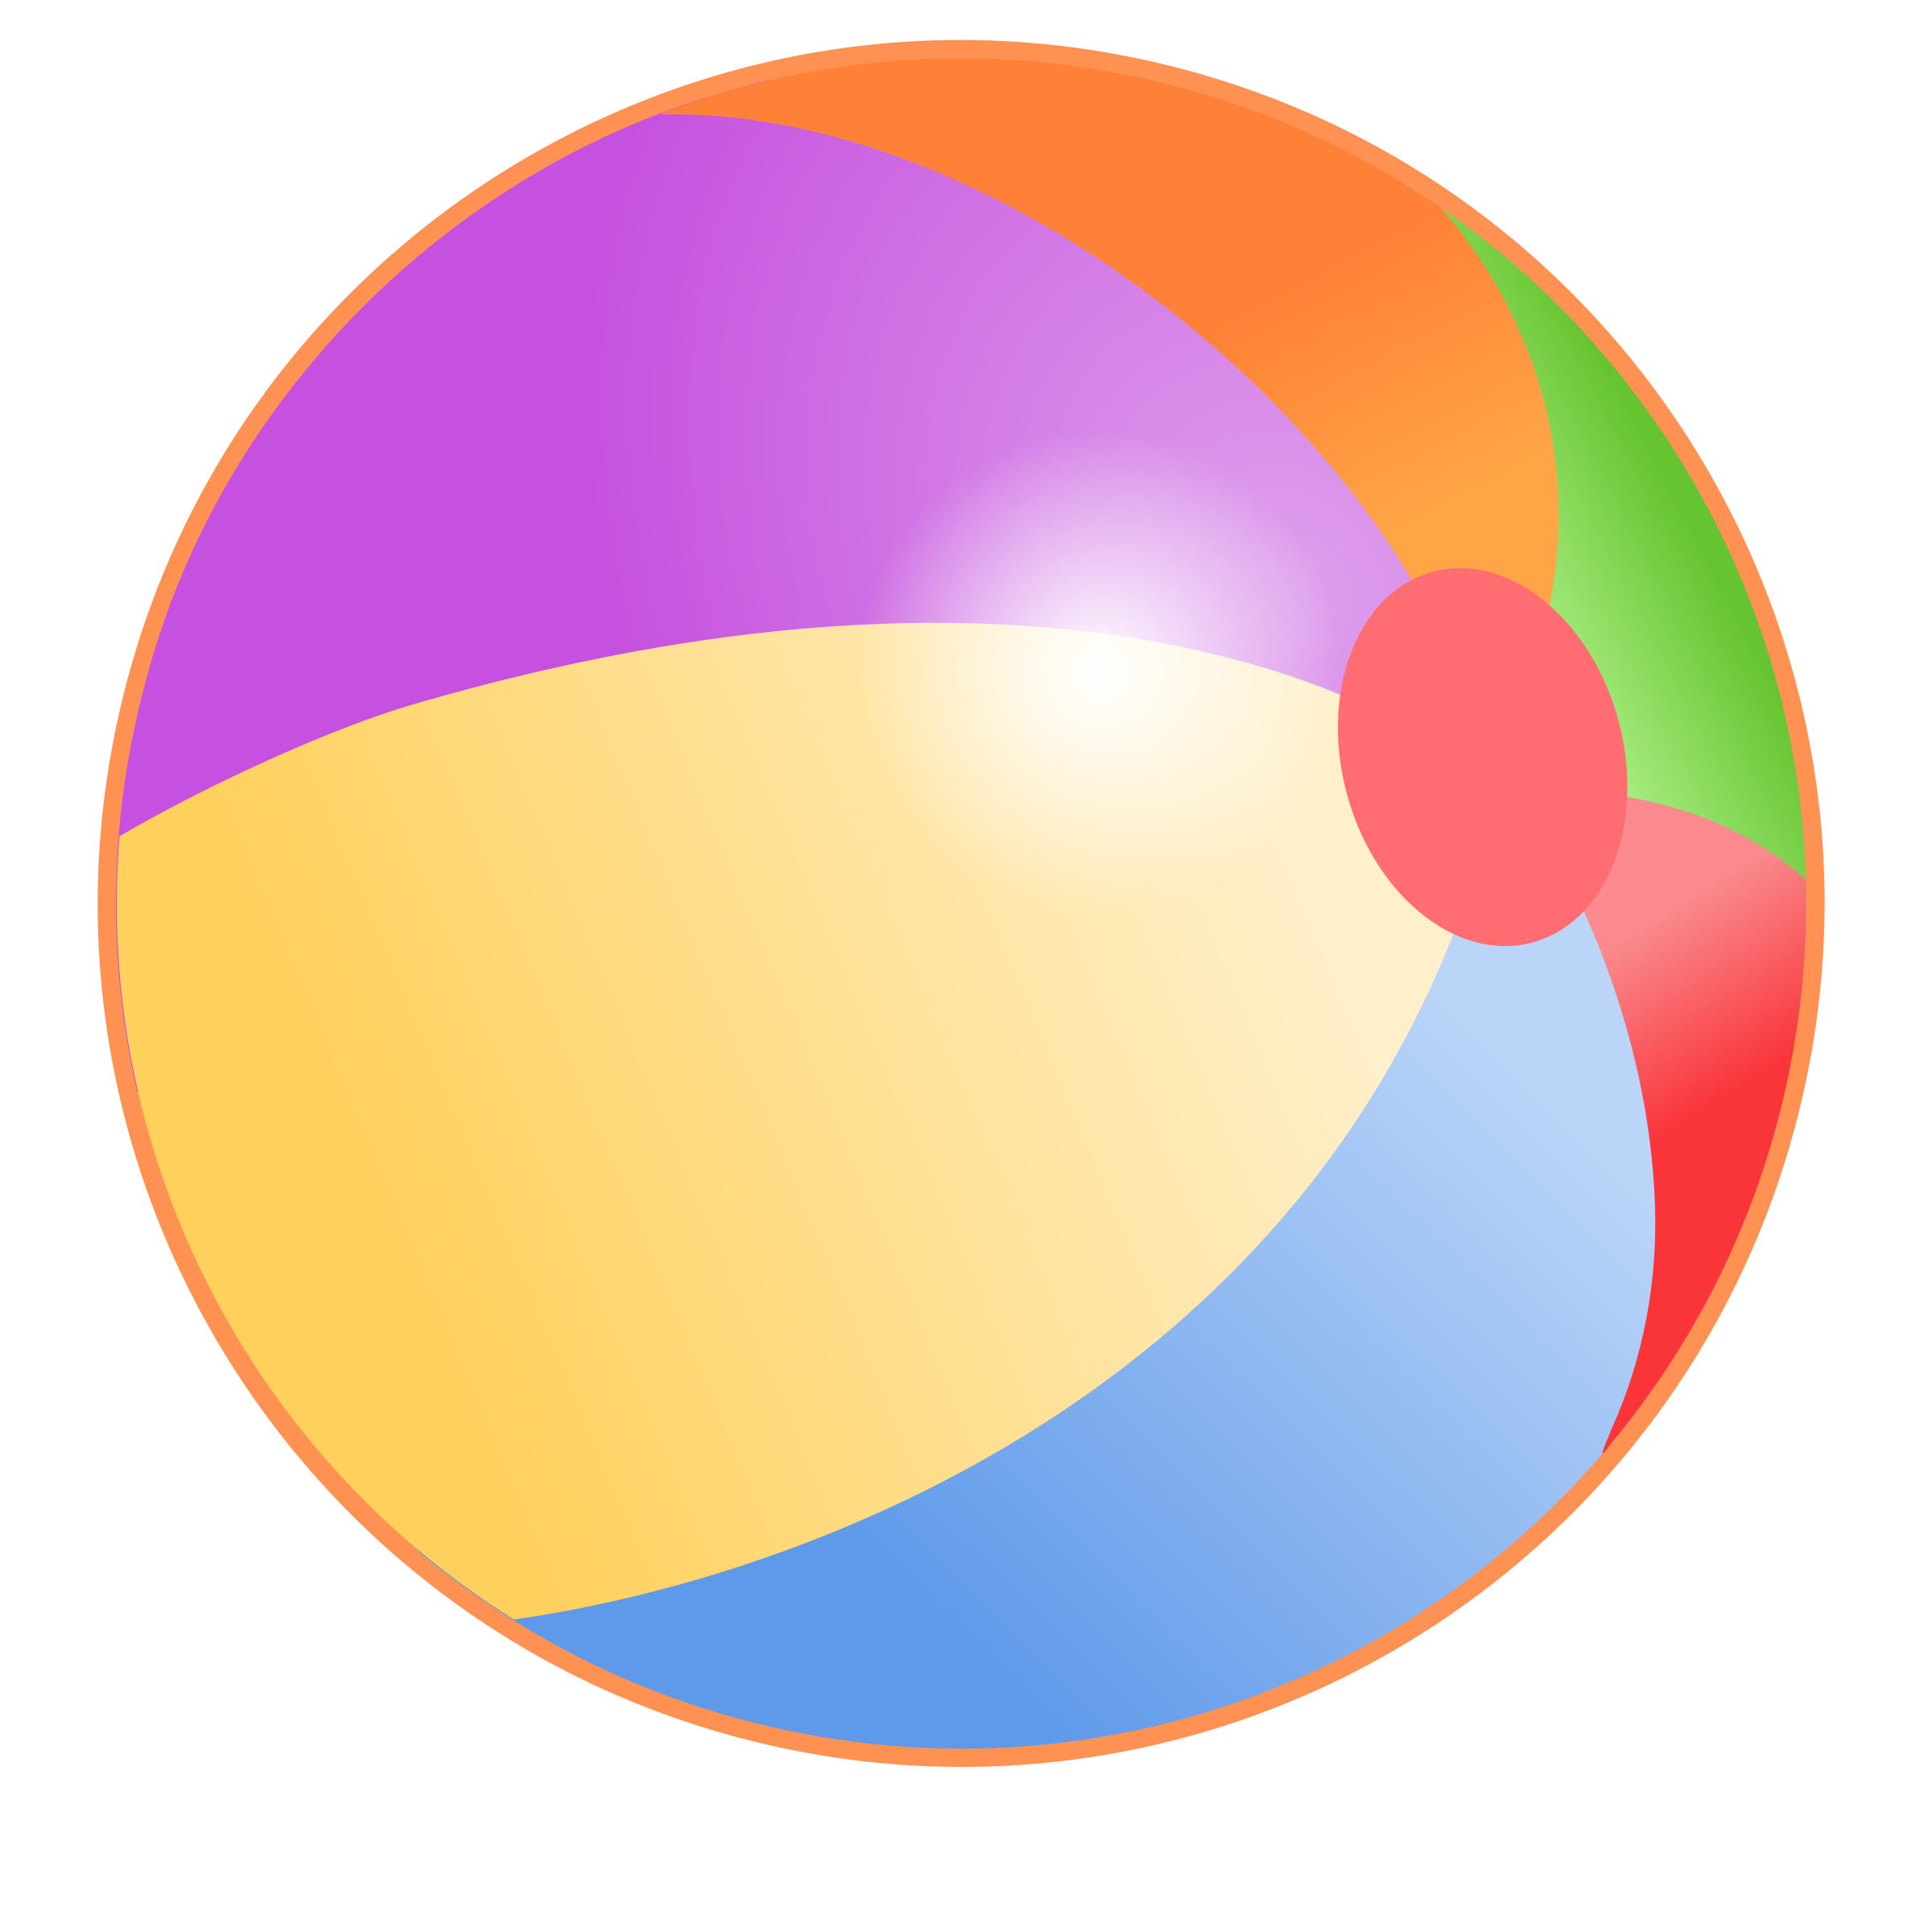 Clip Arts Related To : Bouncing Beach Ball Gif. 